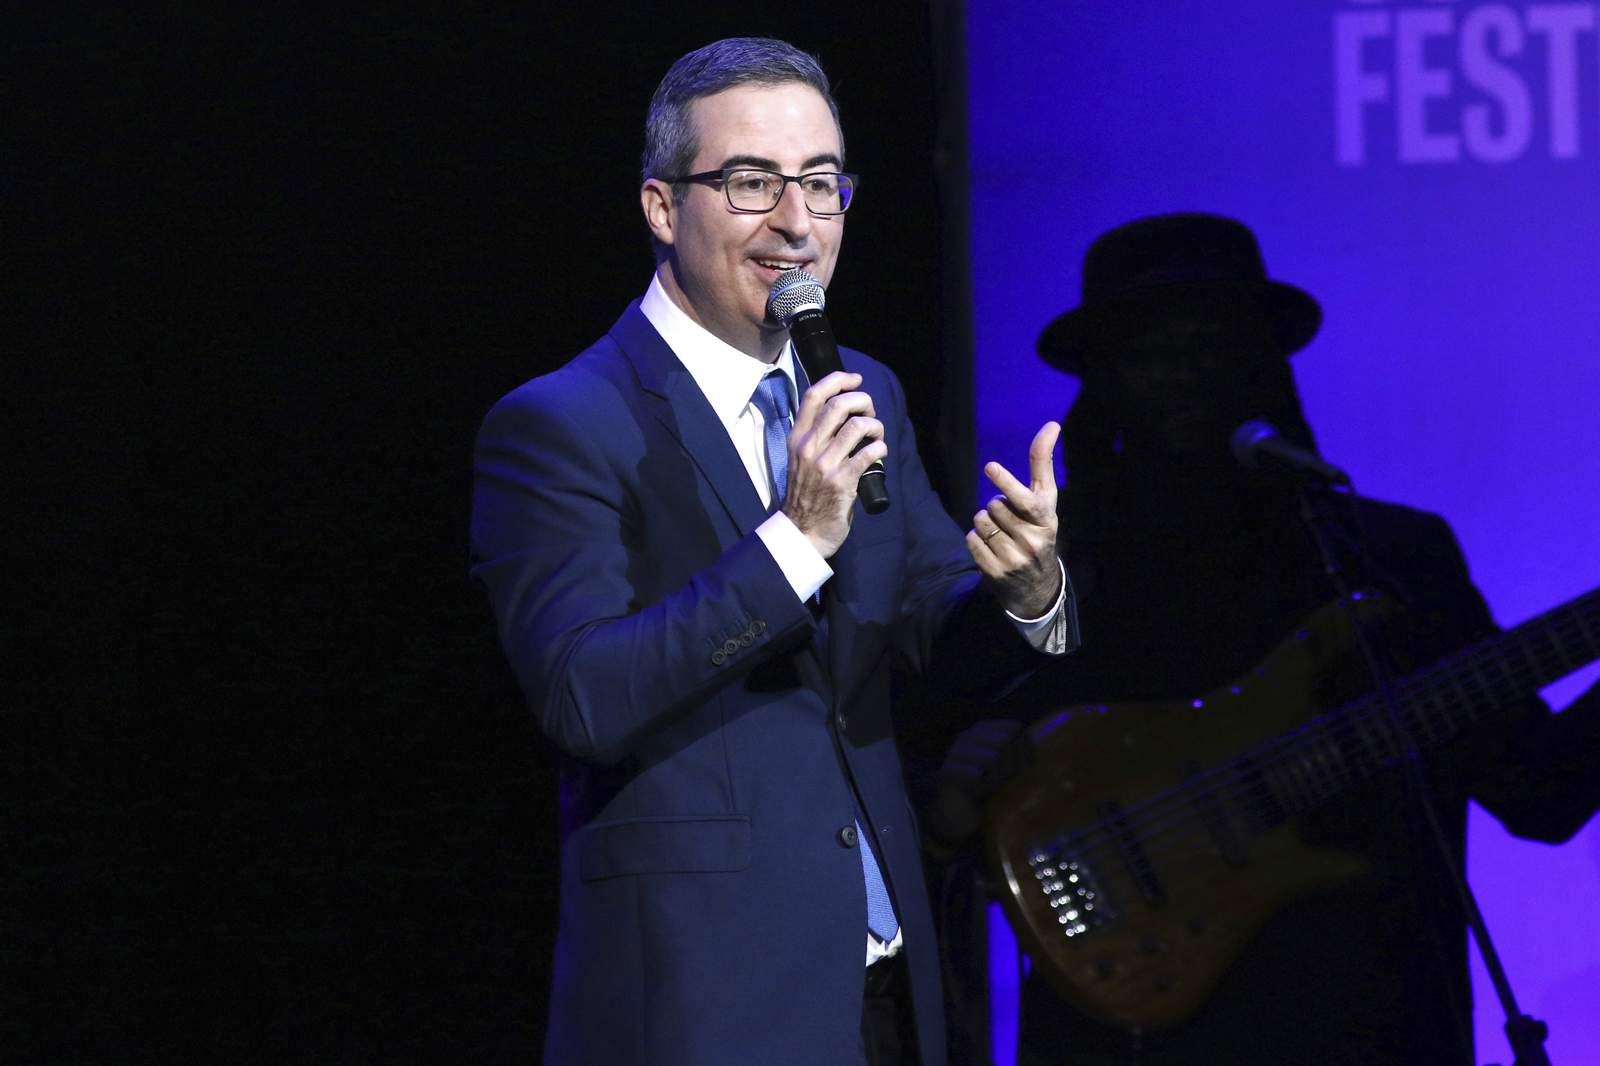 John Oliver: Name sewage plant for me, Ill give to charity